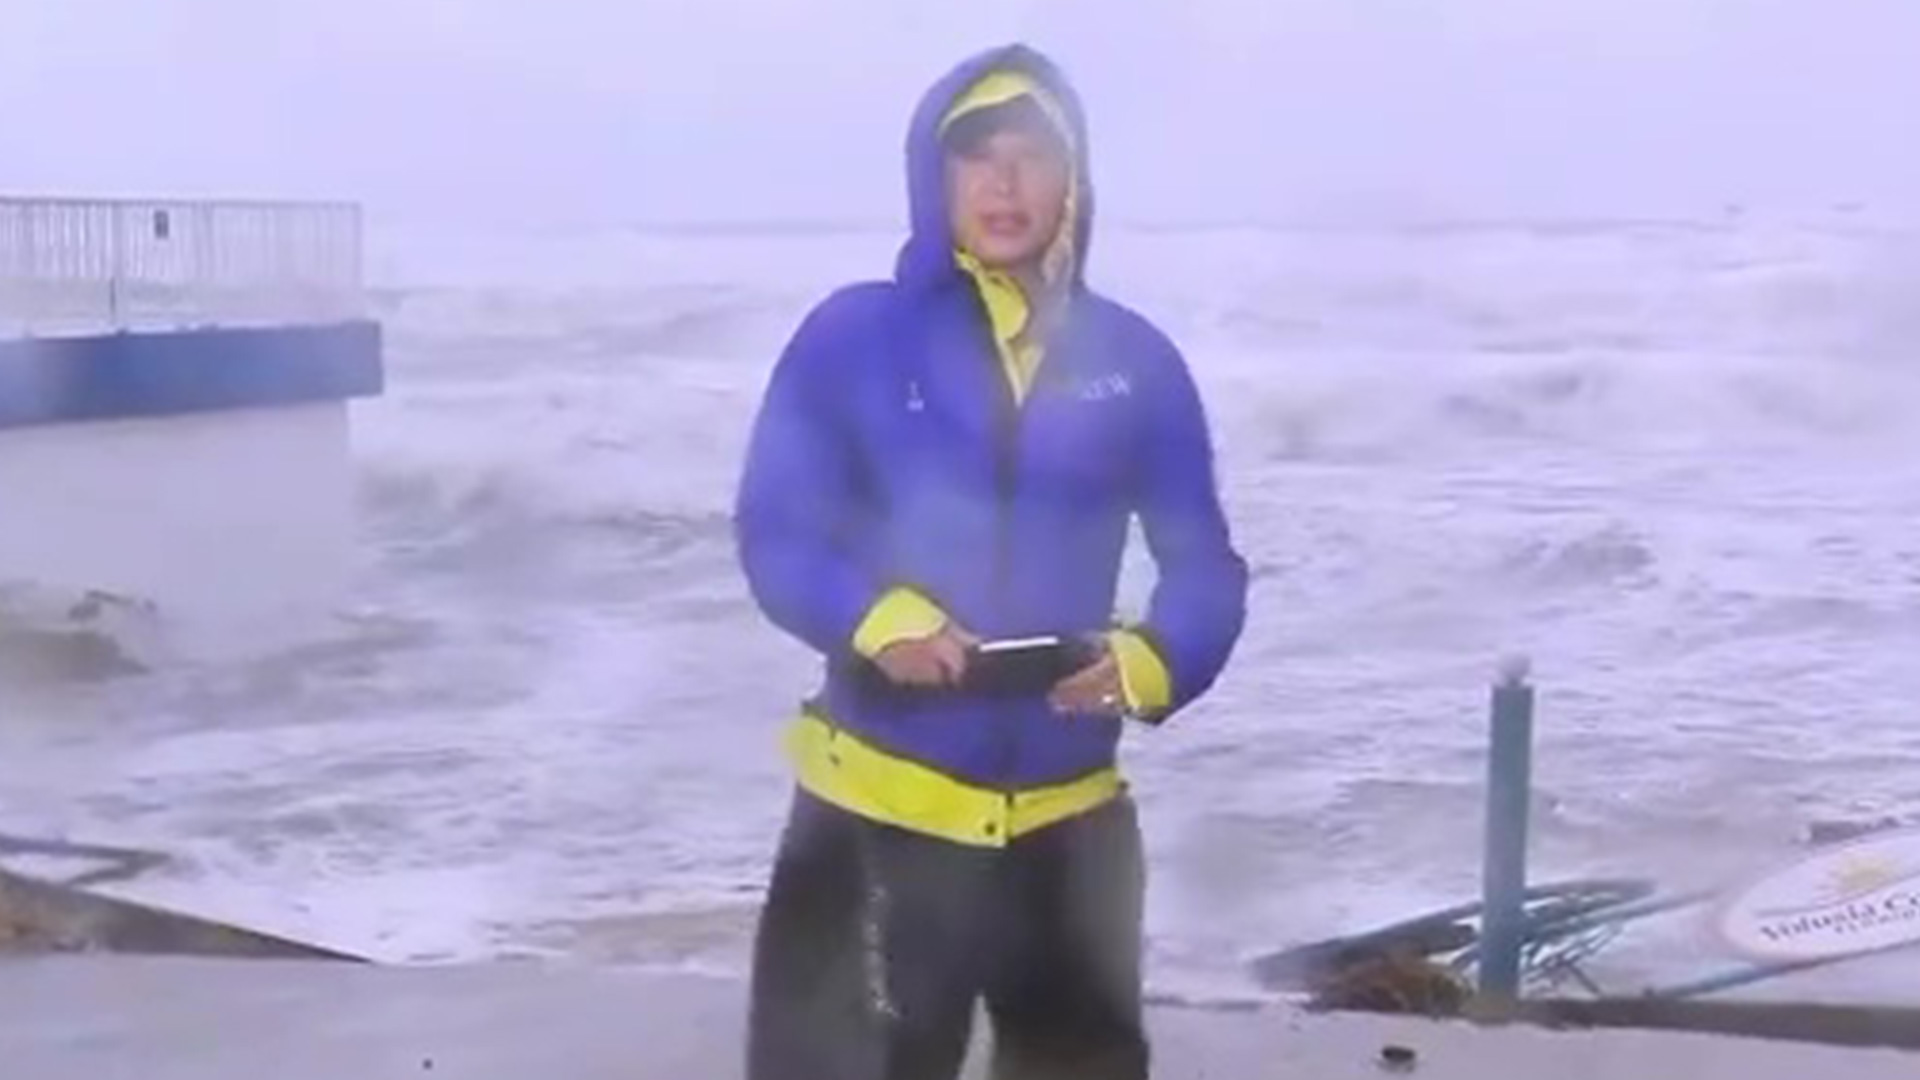 GMA’s Ginger Zee announces a major career change after fans encouraged her to be safe during the dangerous Hurricane Nicole report